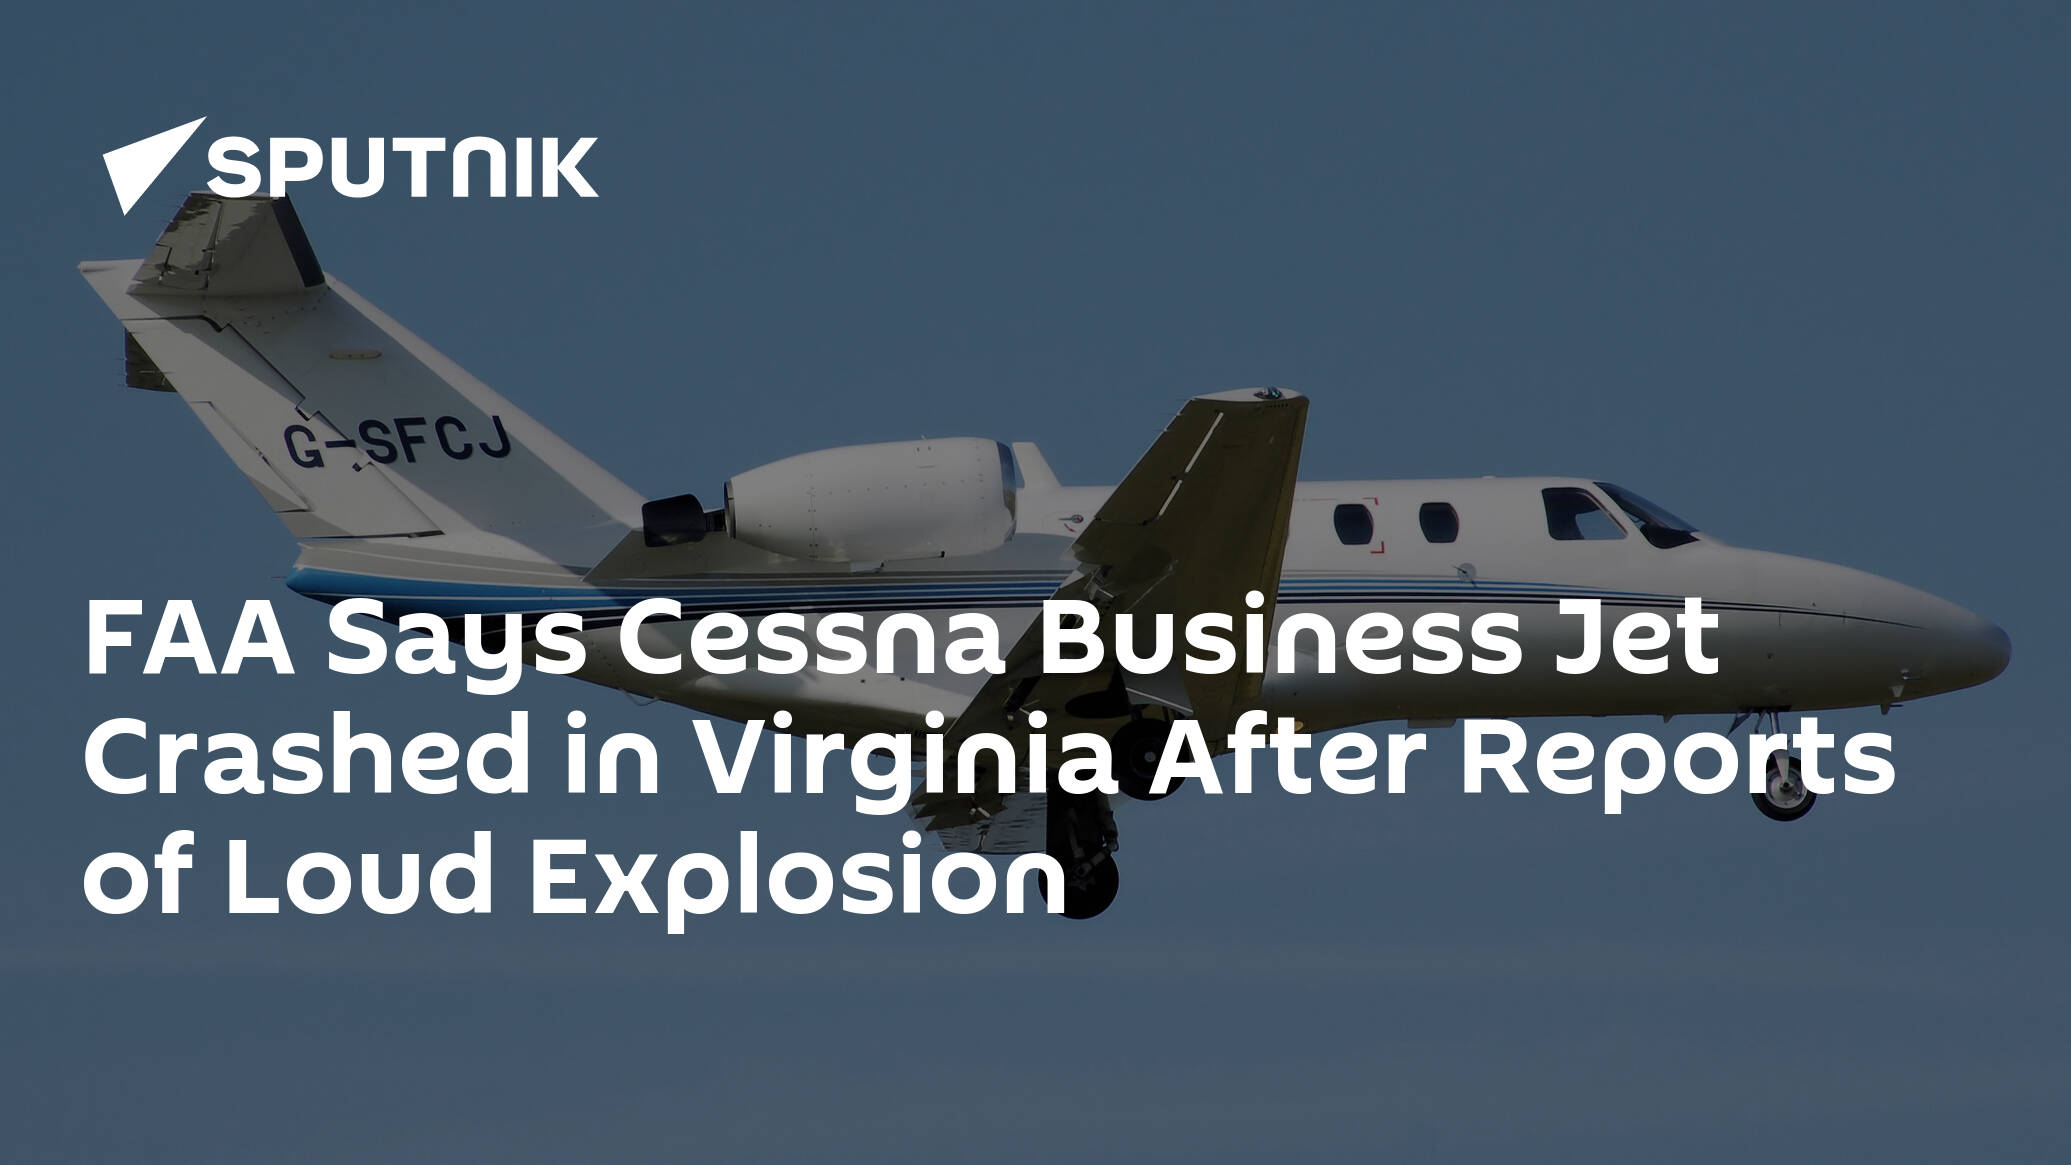 FAA Says Cessna Business Jet Crashed in Virginia After Reports of Loud Explosion